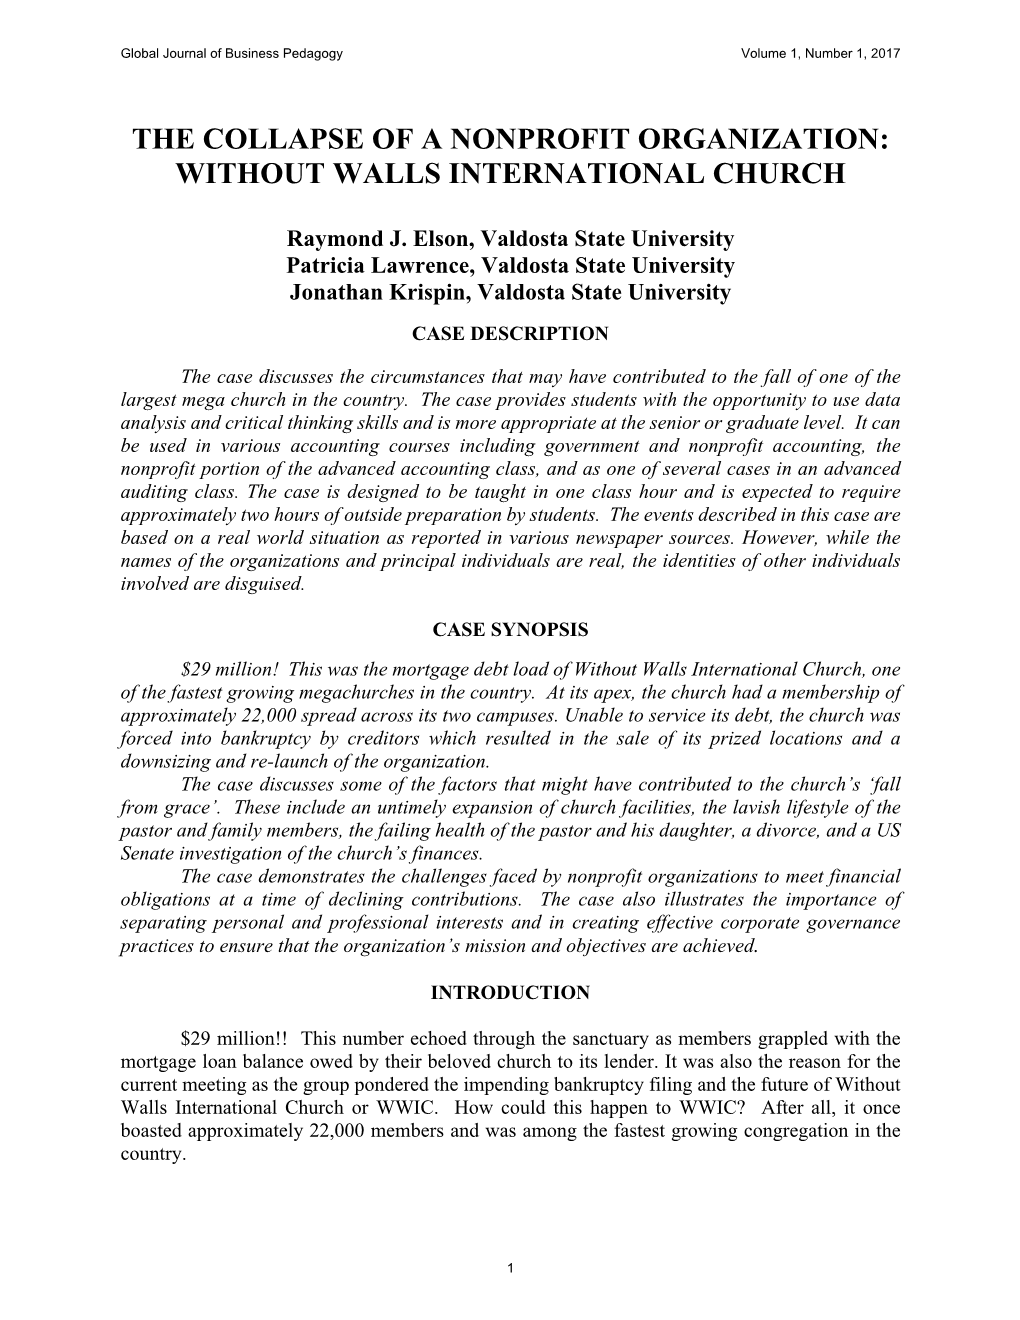 The Collapse of a Nonprofit Organization: Without Walls International Church